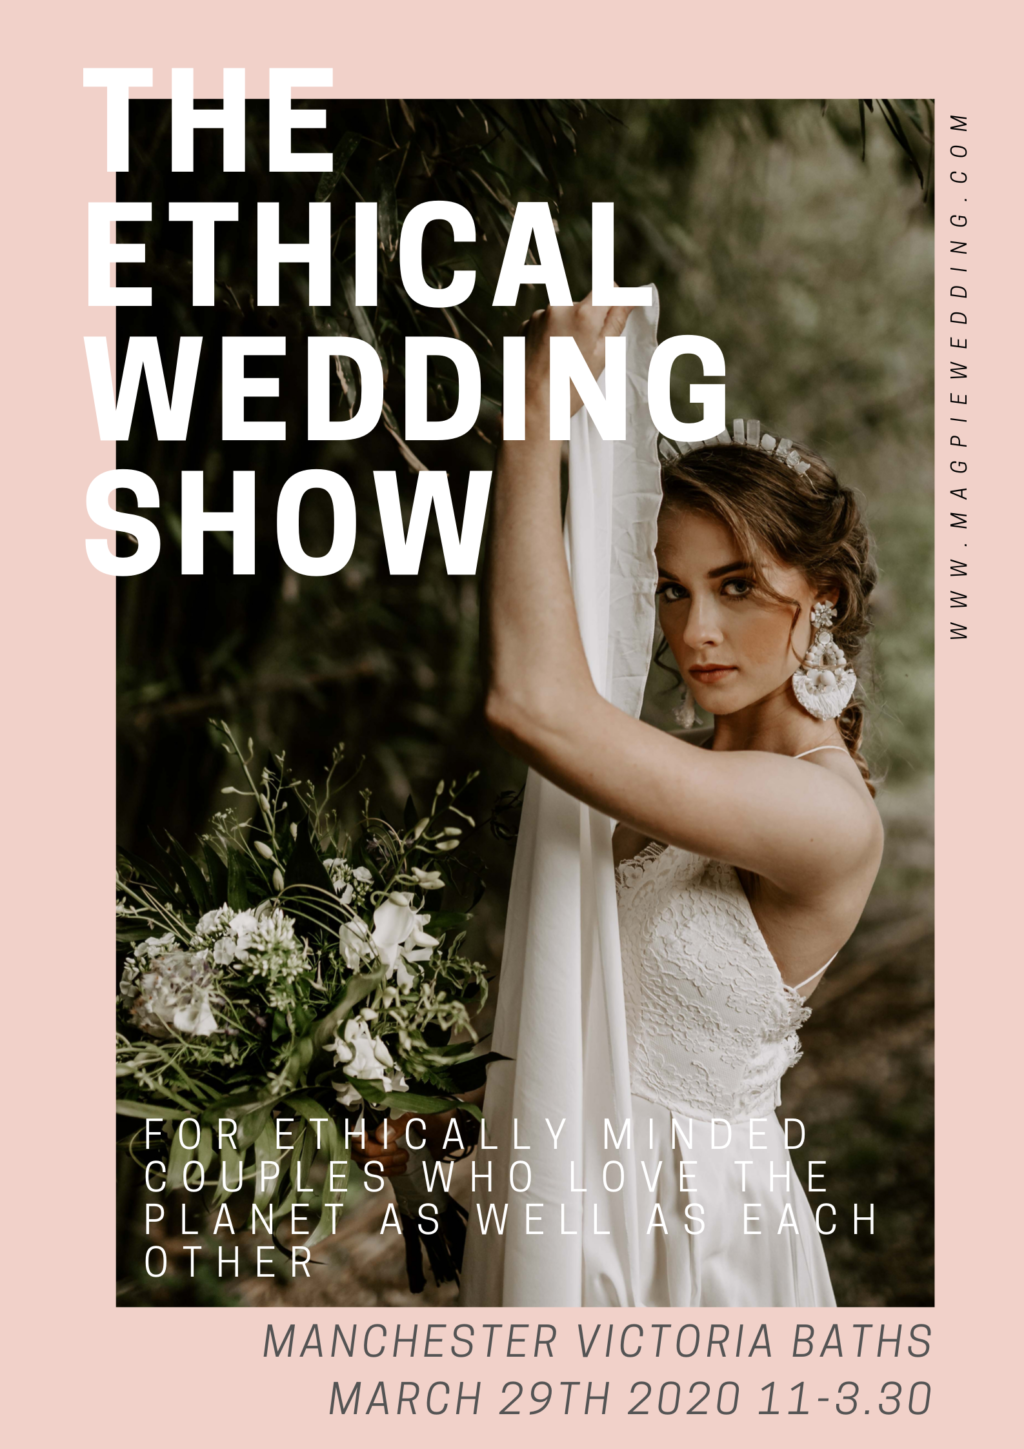 THE ETHICAL WEDDING SHOW